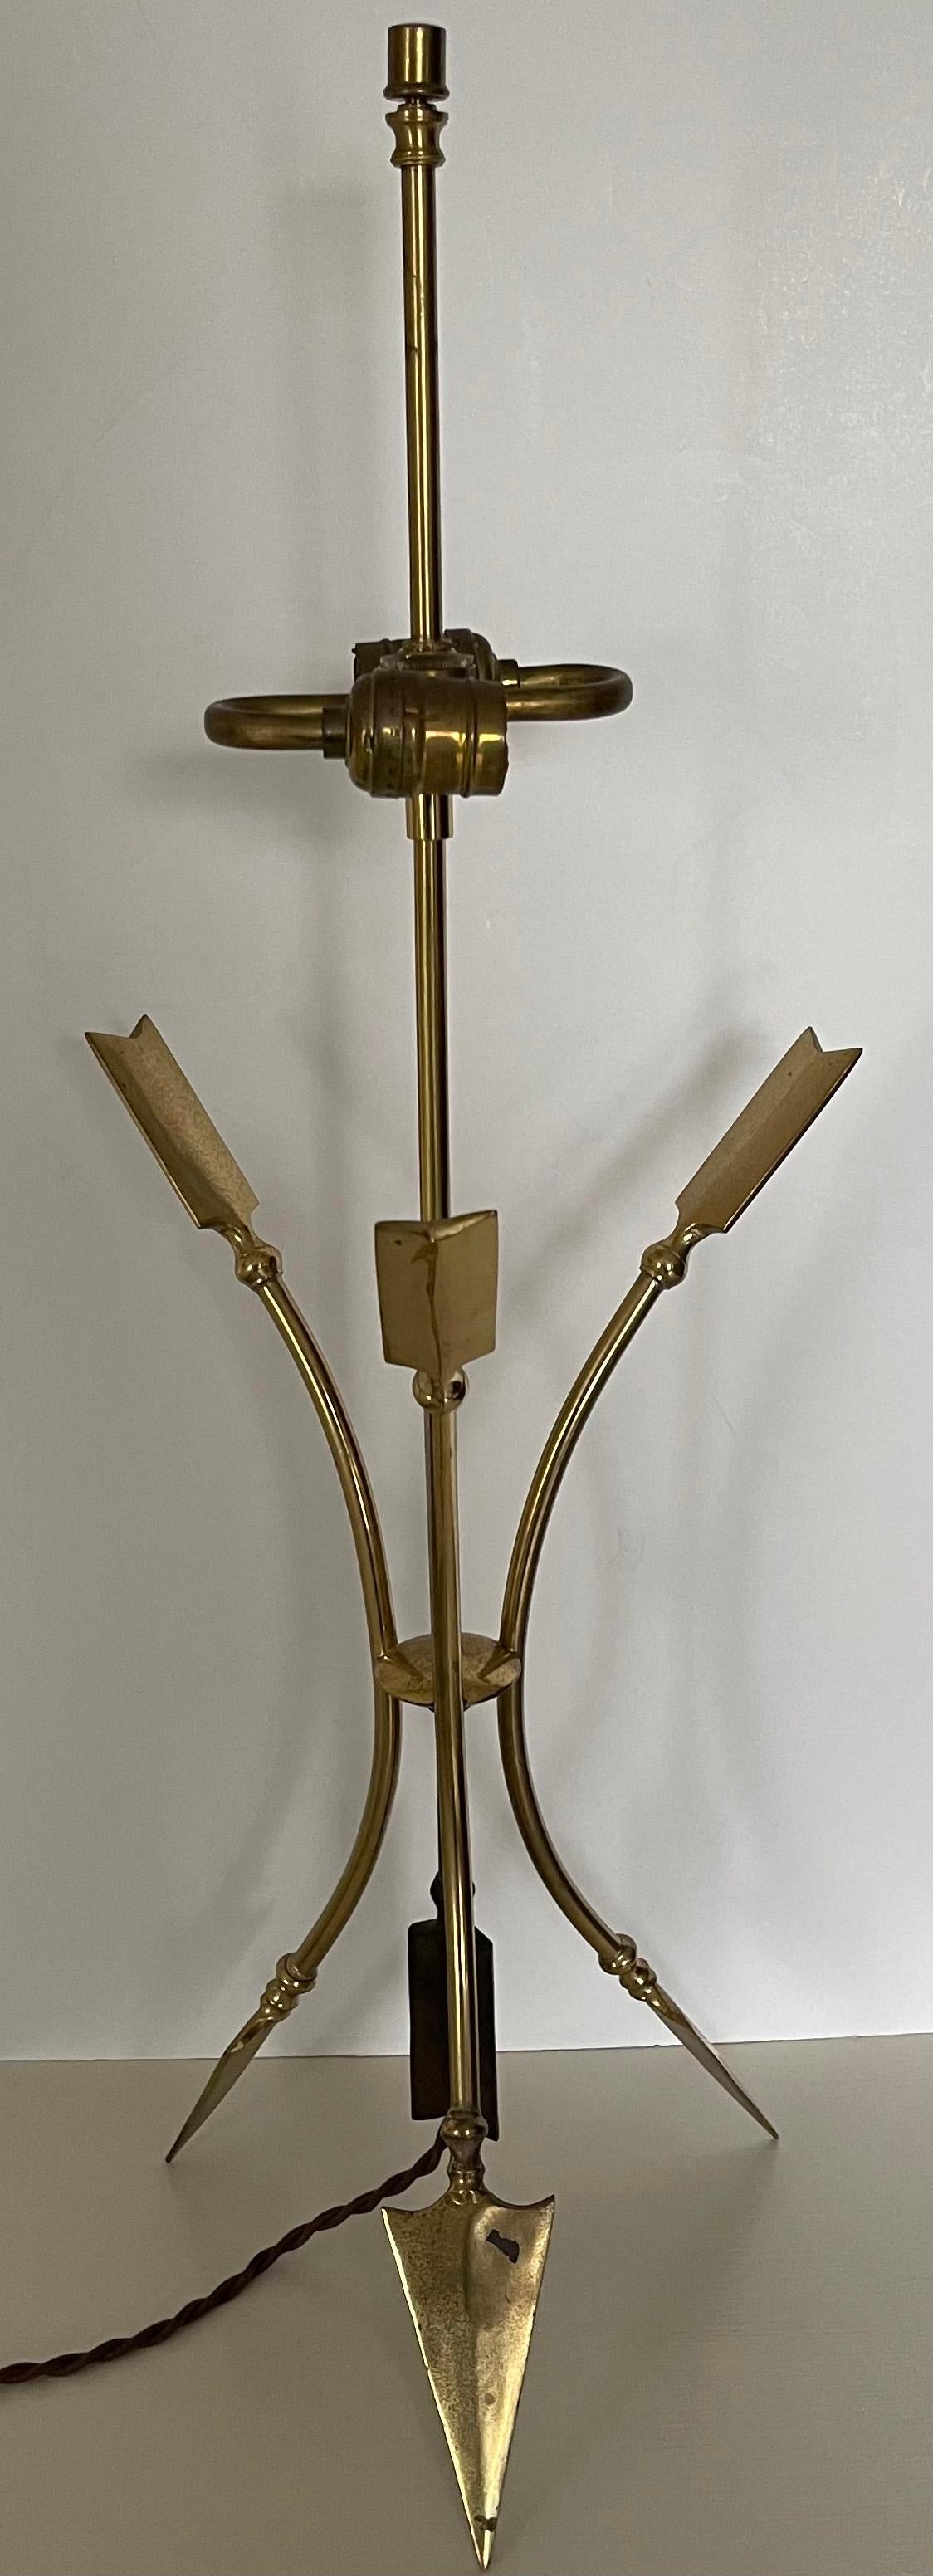 1960s Maison Jansen style brass Directorie style lamp. Brass retains overall unpolished patina. No makers mark or signature. 
Newly rewired with brown silk braided cord. Original double socket has new interior components. Lamp does not require a